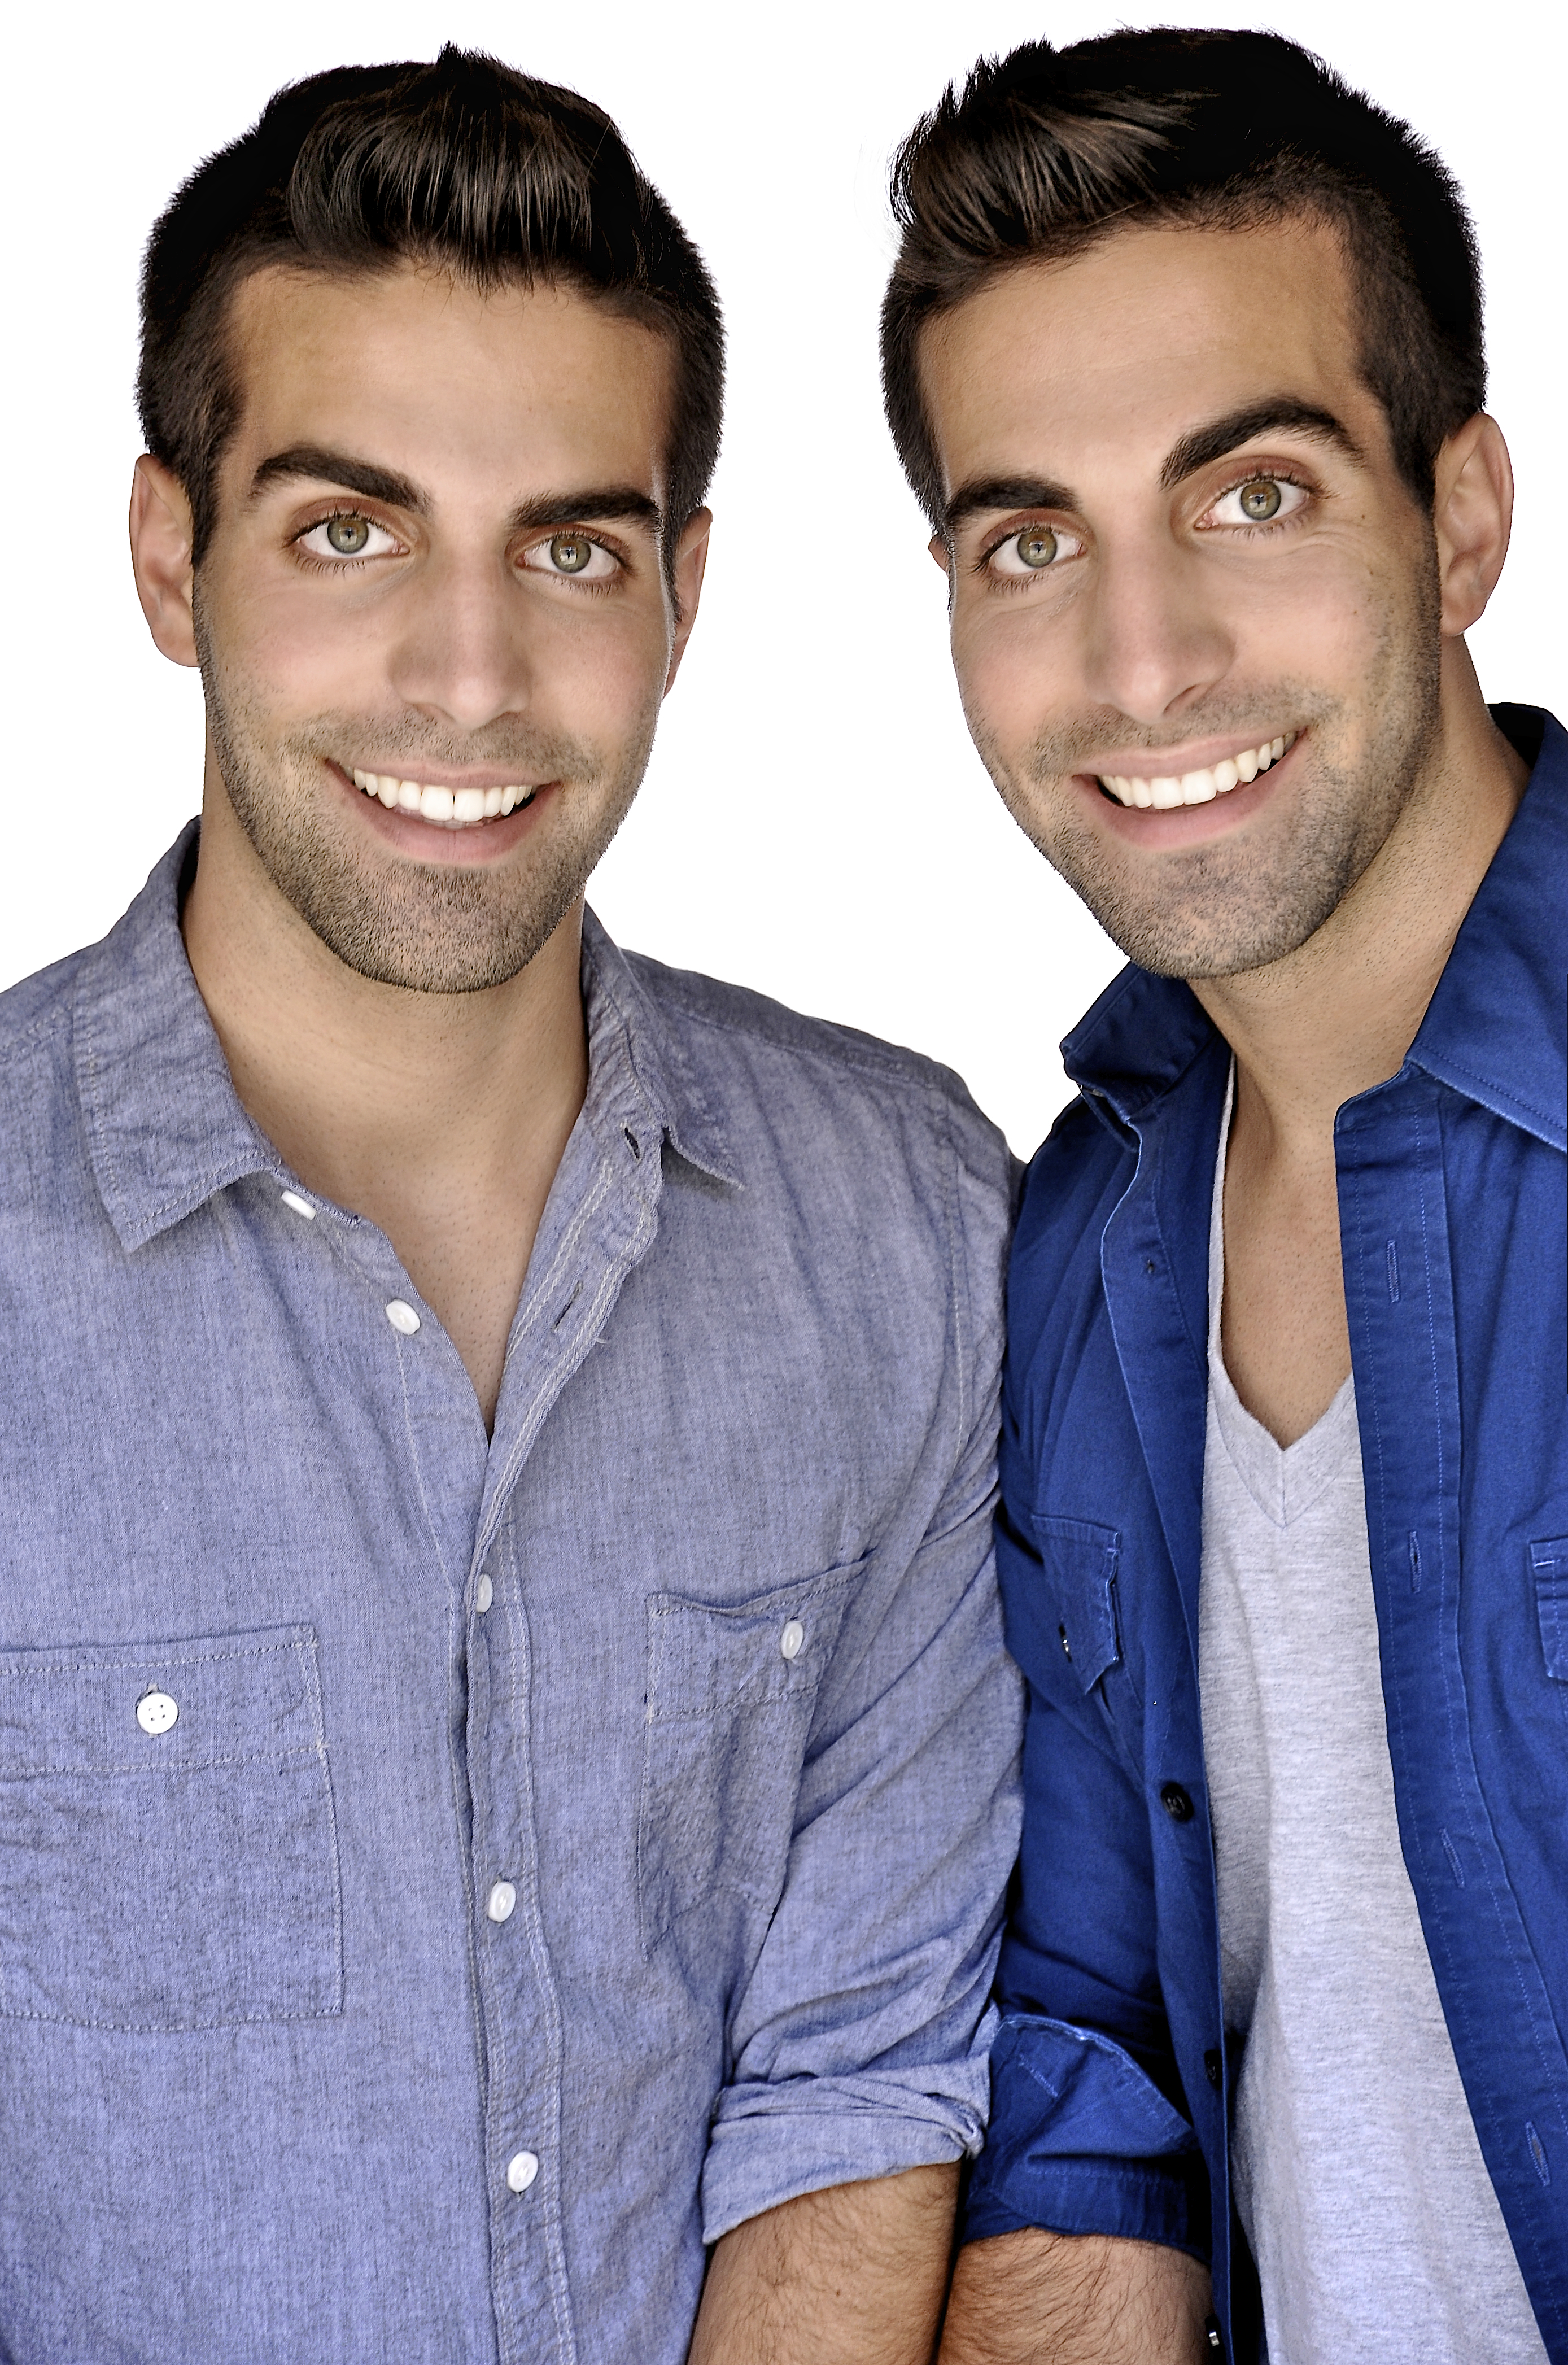 Dotan Ryder (Left) & identical twin brother Aidan Ryder (Right)